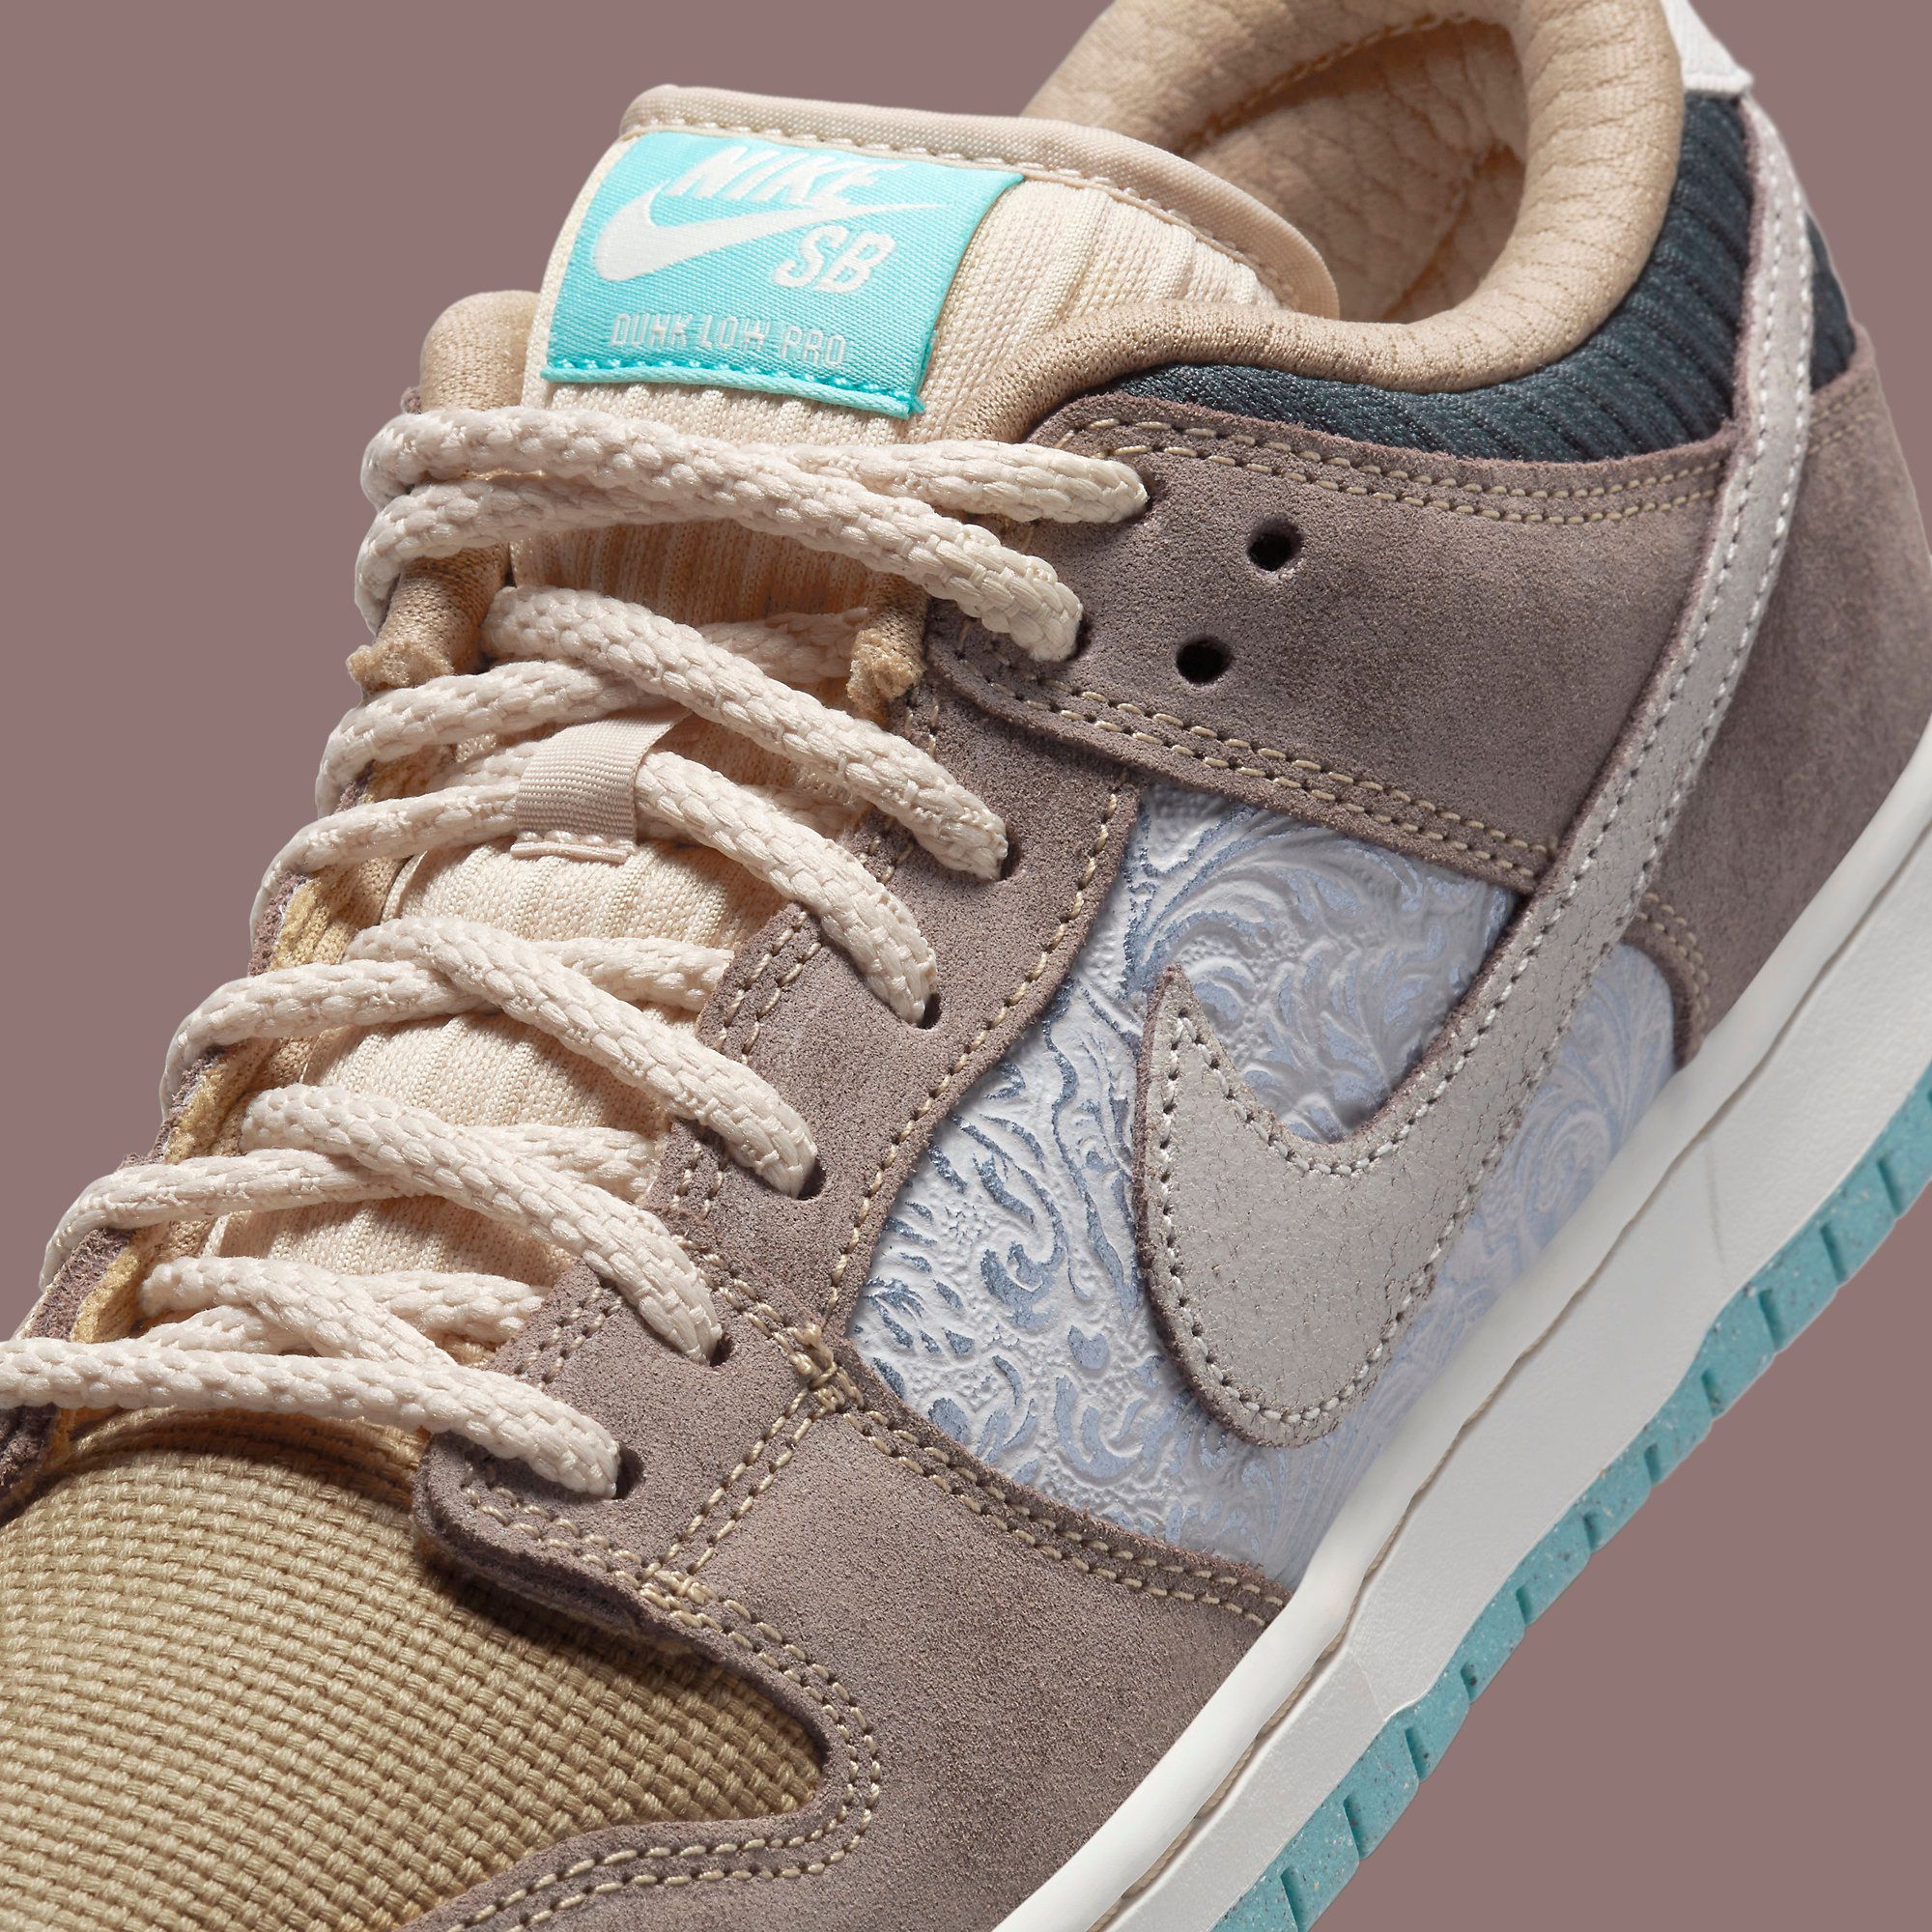 The Nike SB Dunk Low Live